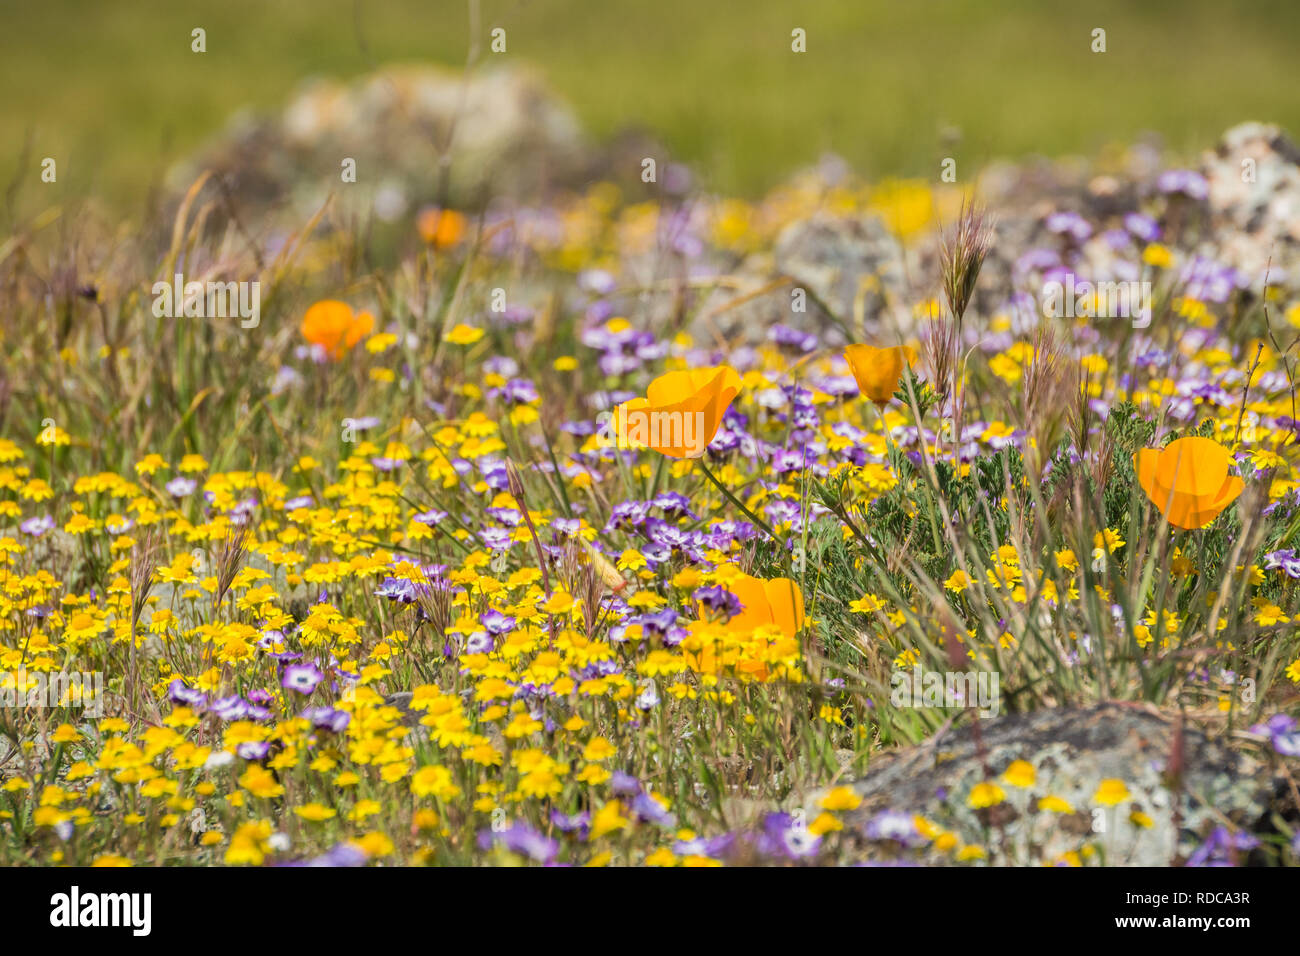 California poppies blooming on a meadow, Goldfields and Gilia in the background, Henry W. Coe State Park, California Stock Photo